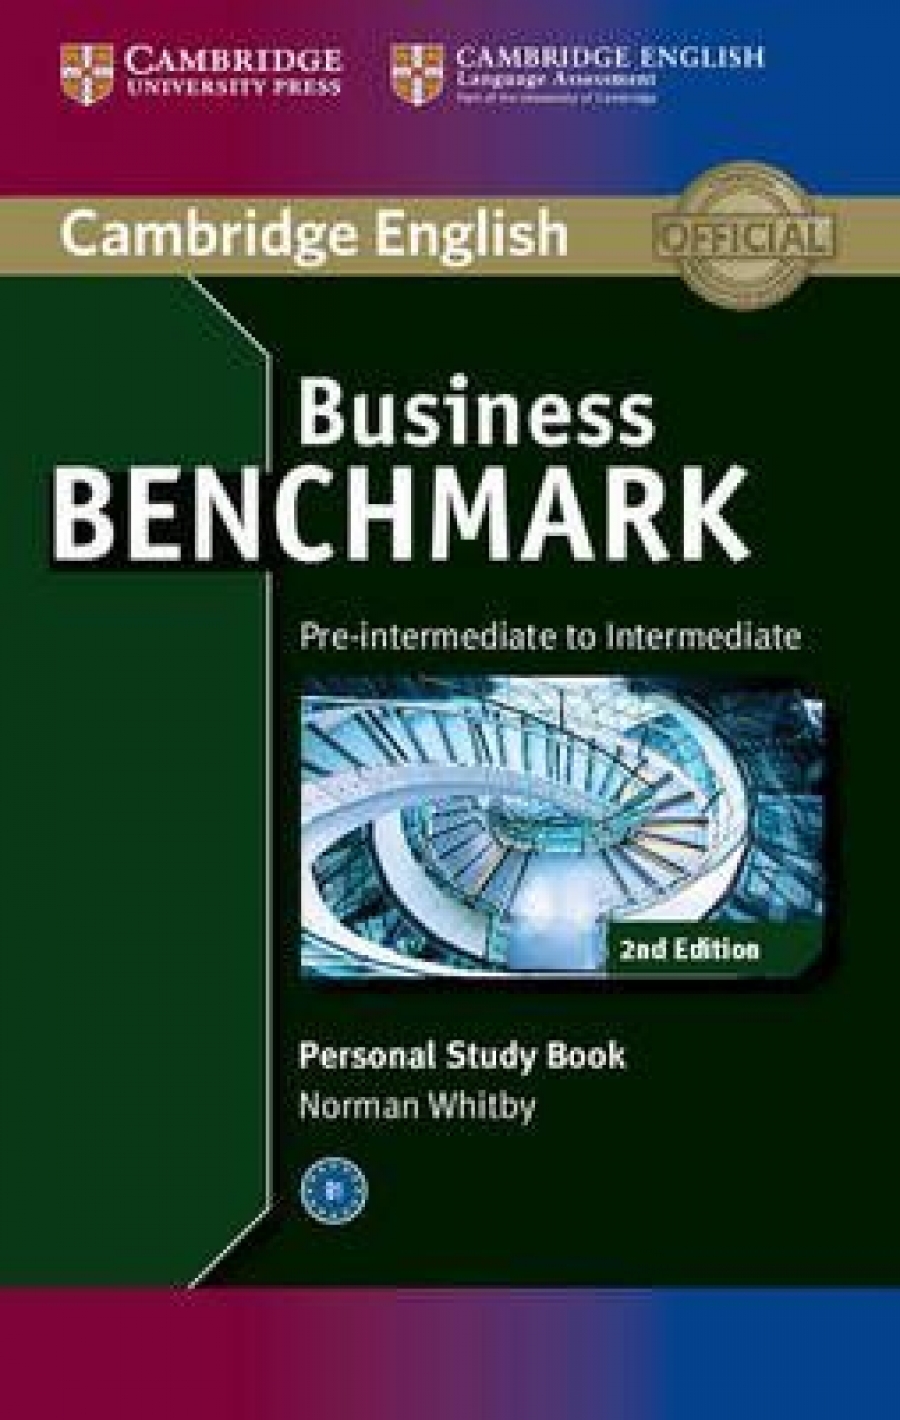 Norman Whitby Business Benchmark. Pre-intermediate to Intermediate. Personal Study Book (2nd Edition) 